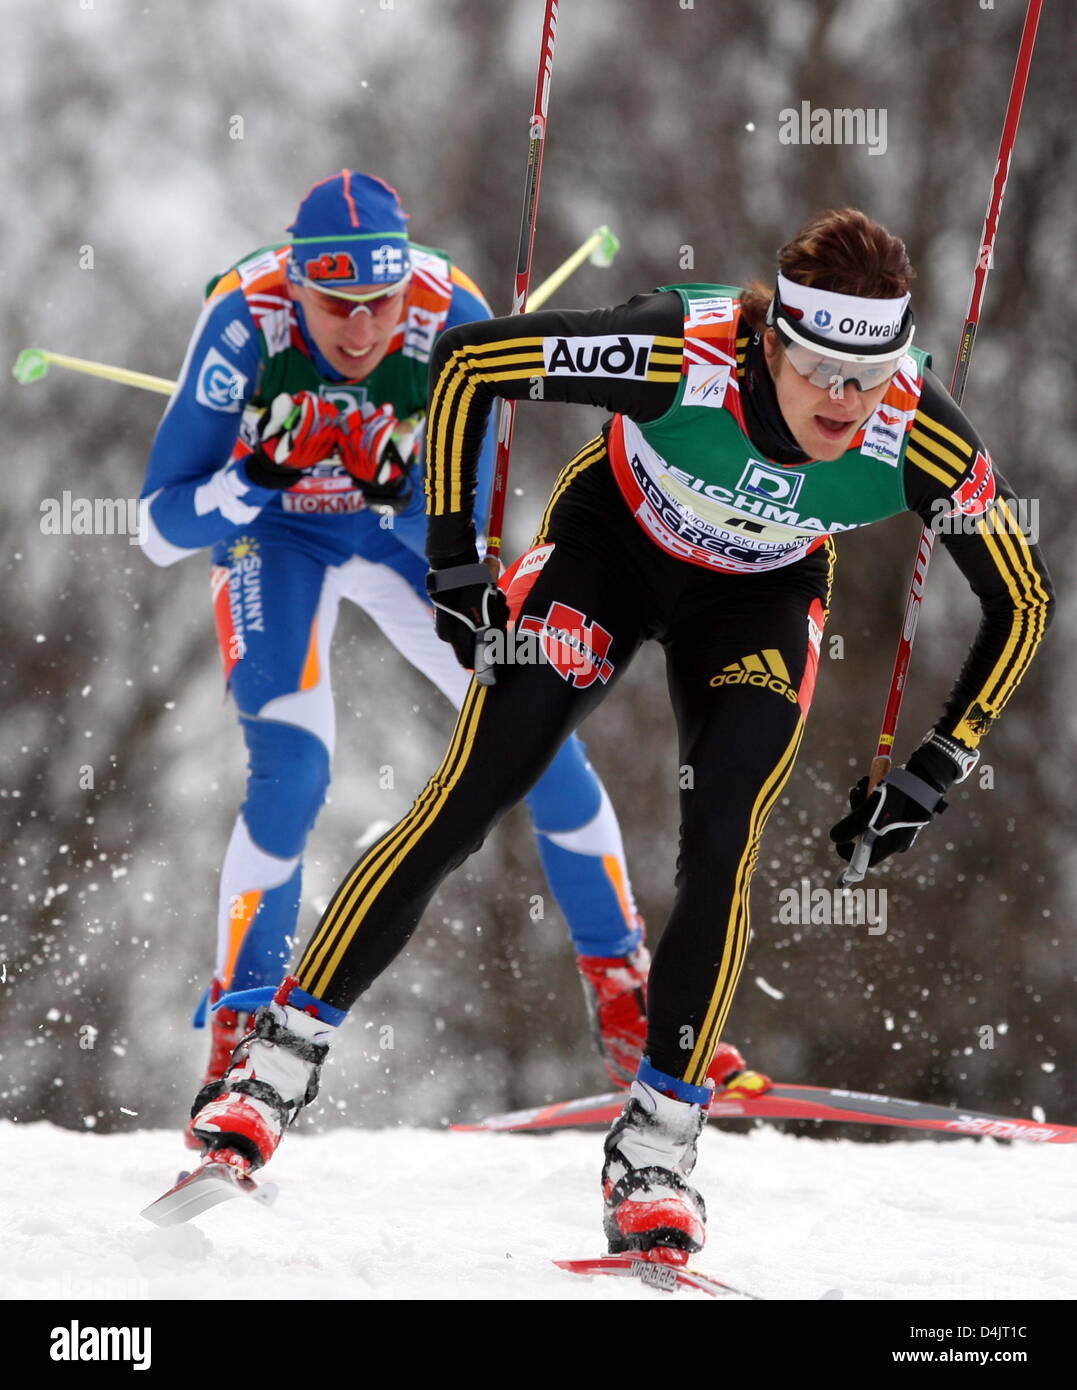 Germany?s Franz Goering competes in the men?s cross-country skiing relay competition at the FIS Nordic World Ski Championships in Liberec, Czech Republic, 27 February 2009. Norway won ahead of Germany. Photo: Kay Nietfeld Stock Photo